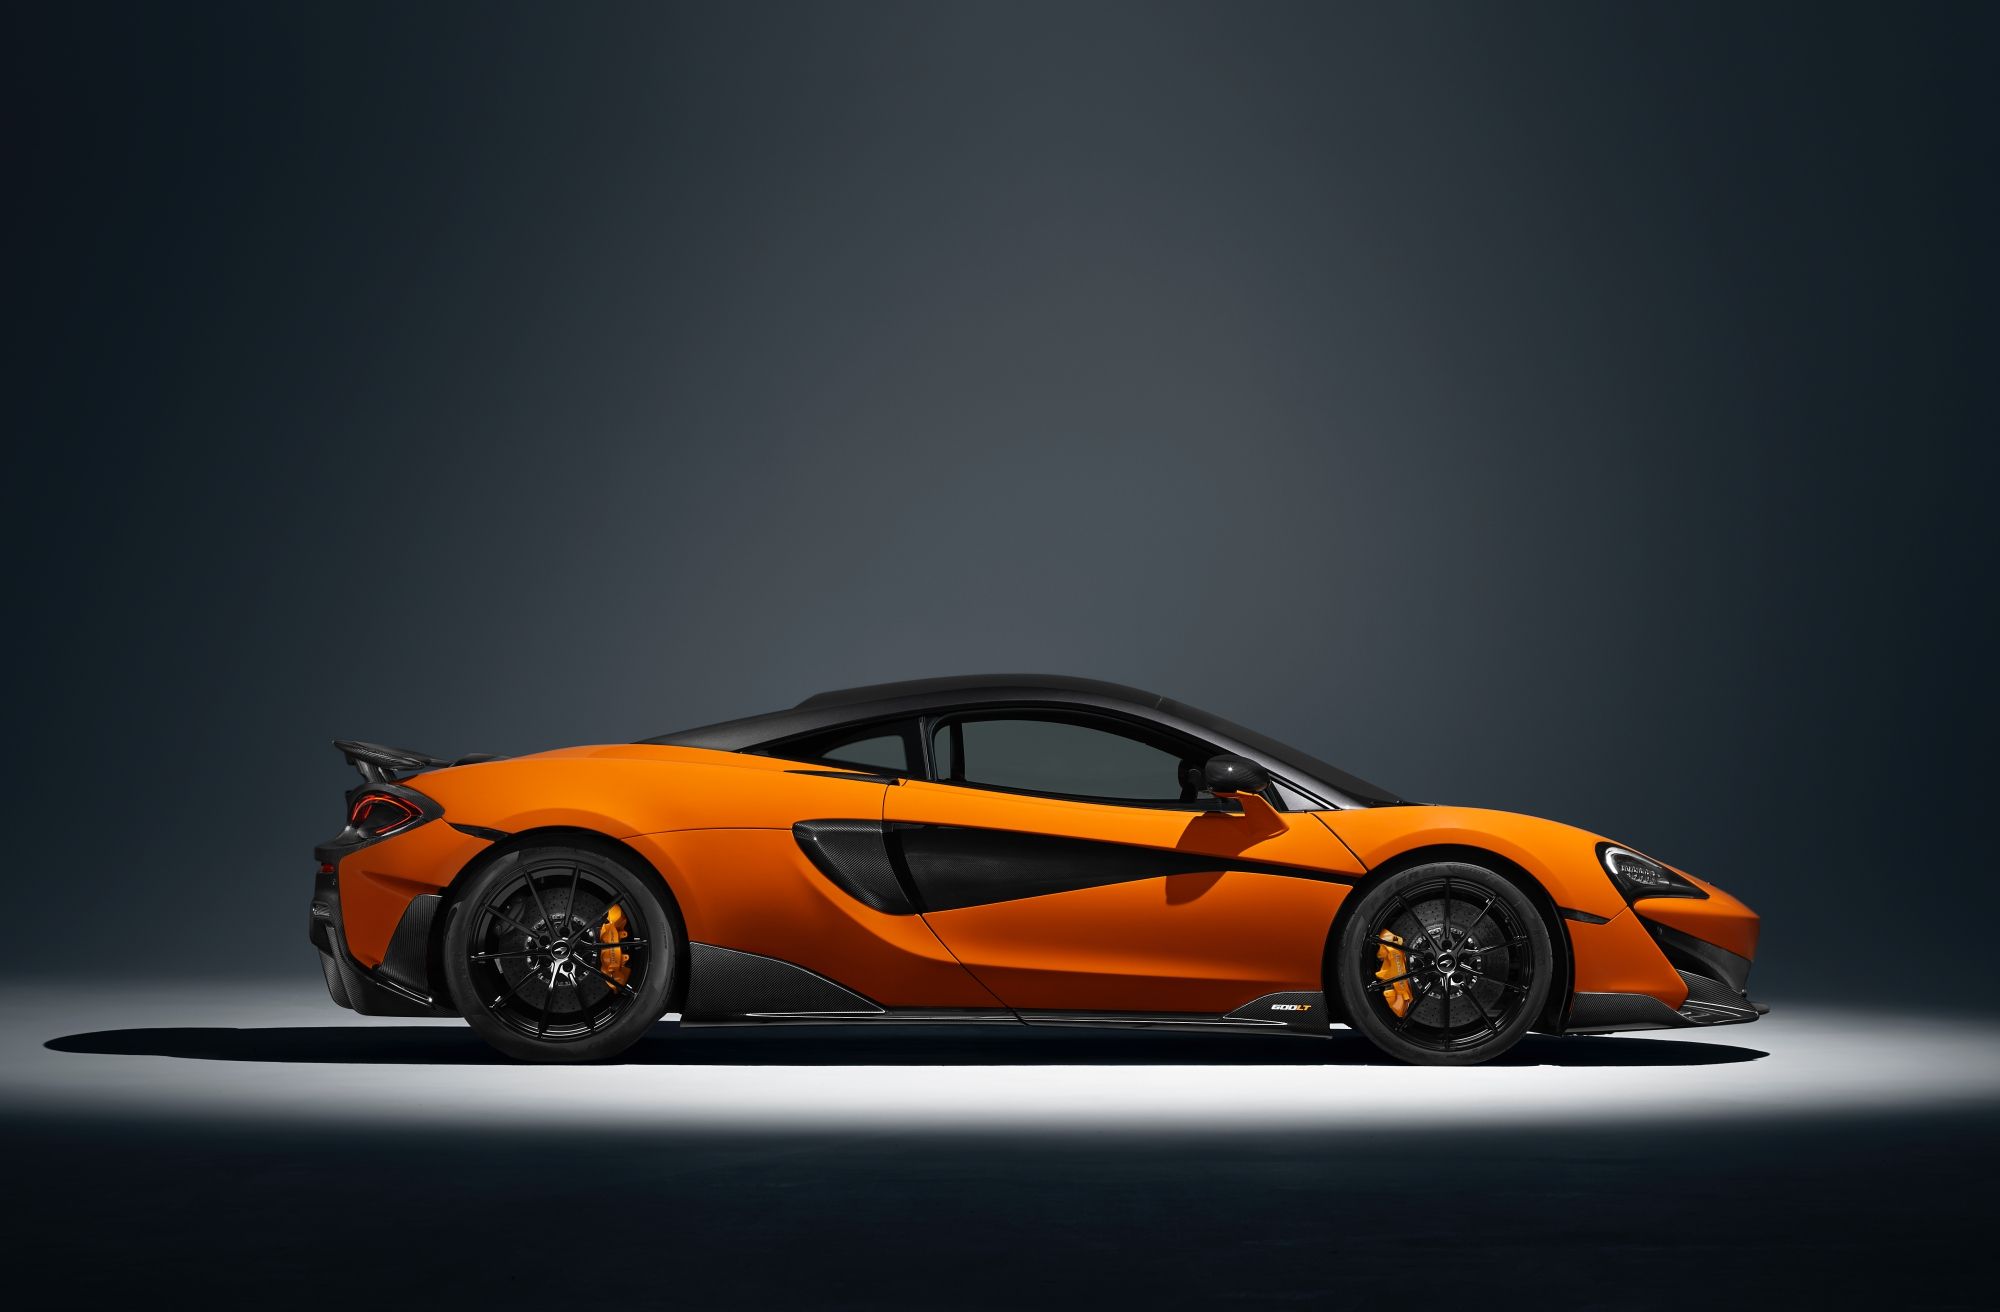 The McLaren 600LT Debuts In Singapore, Just In Time For F1